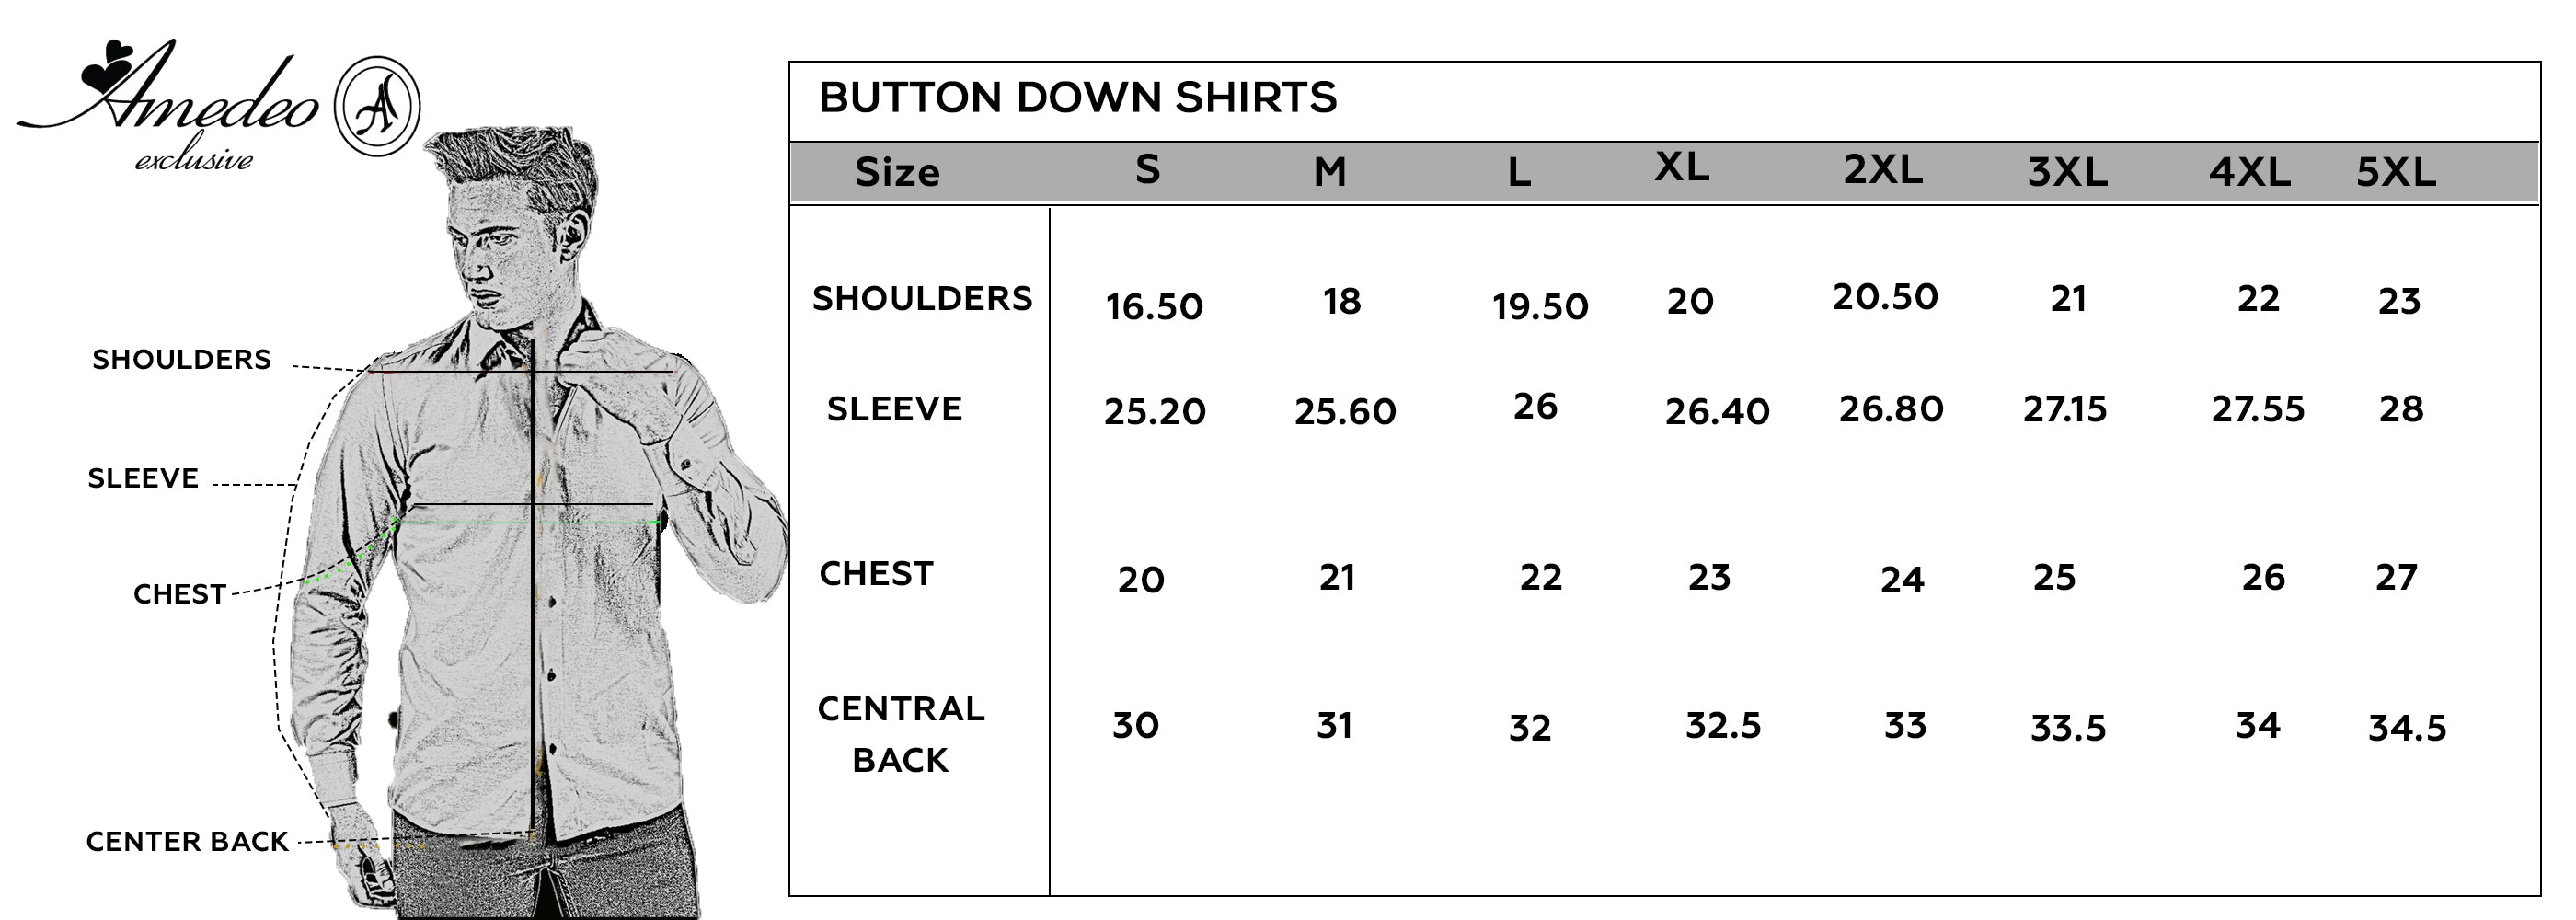 Black White Floral Mens Slim Fit Designer French Cuff Shirt - tailored Cotton Shirts for Work and Casual